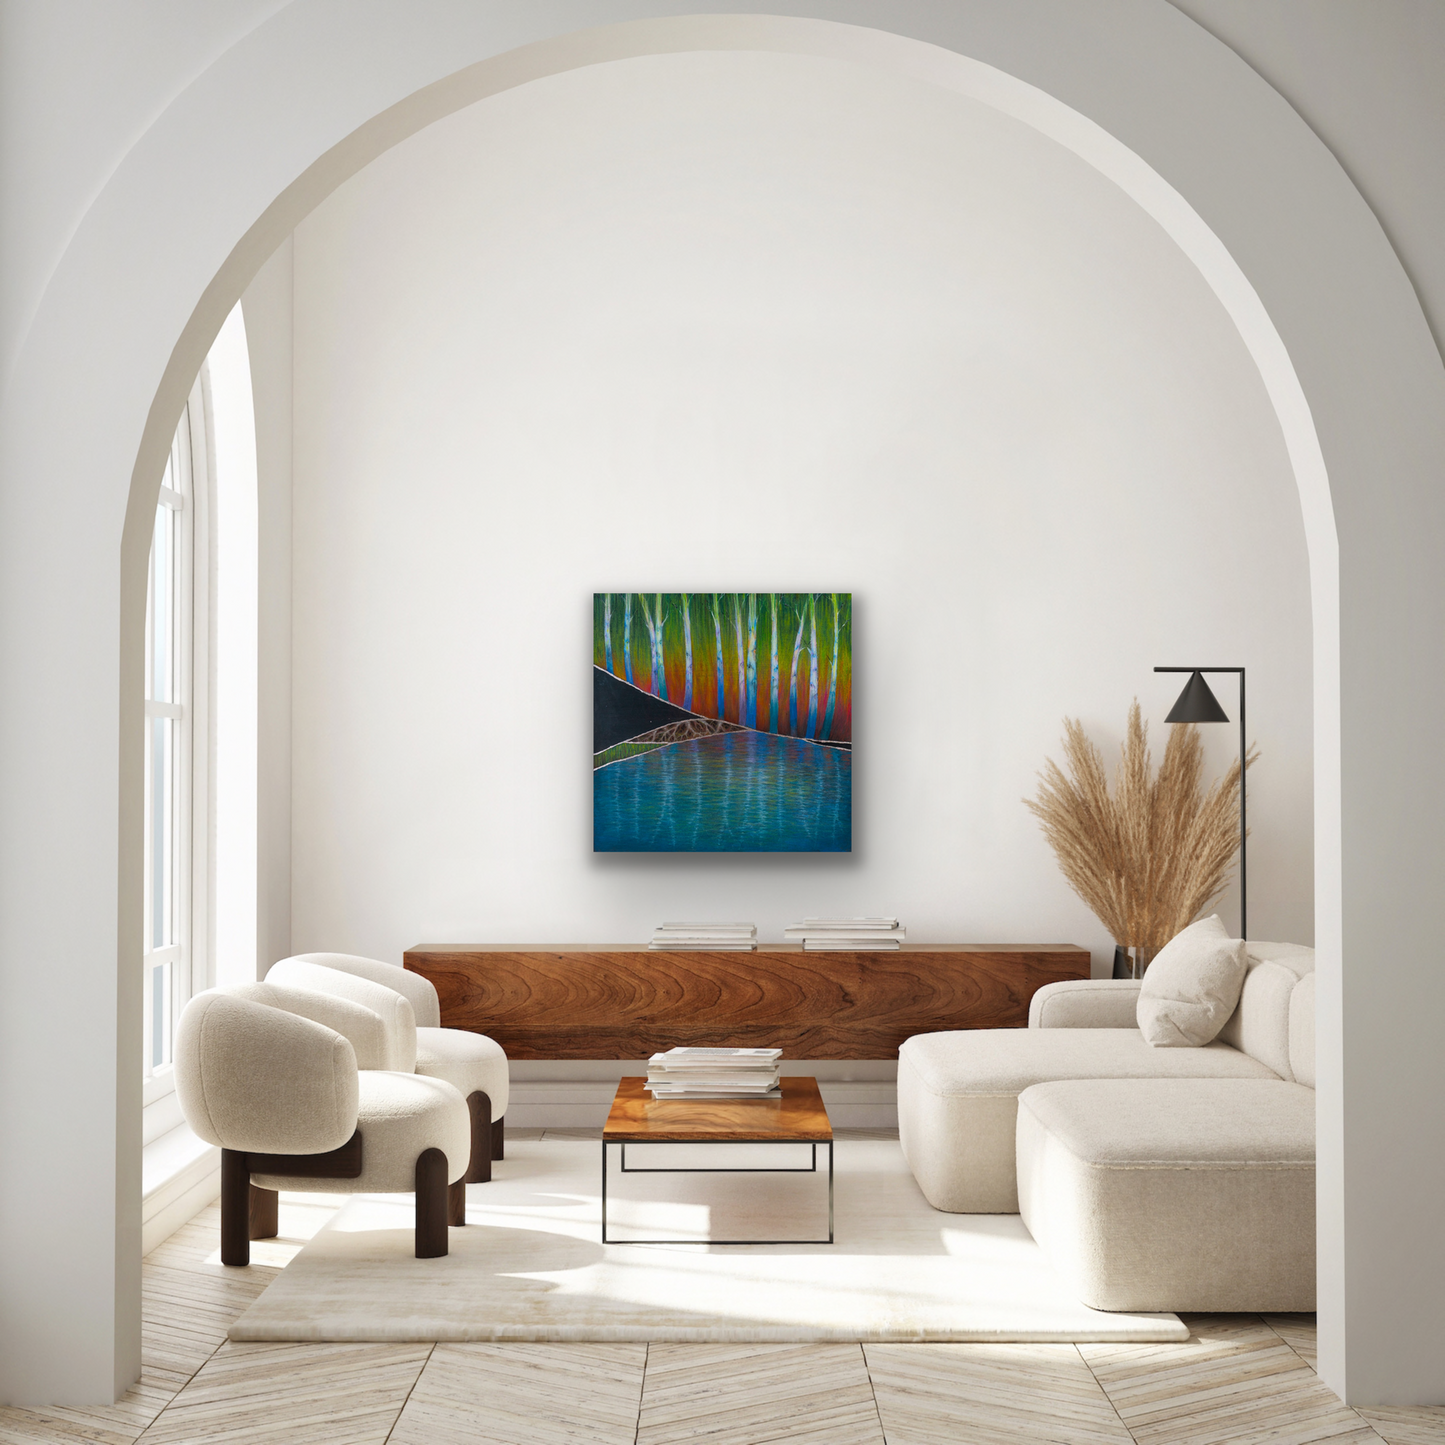 "Reflection" work of art would look stunning in your living room.